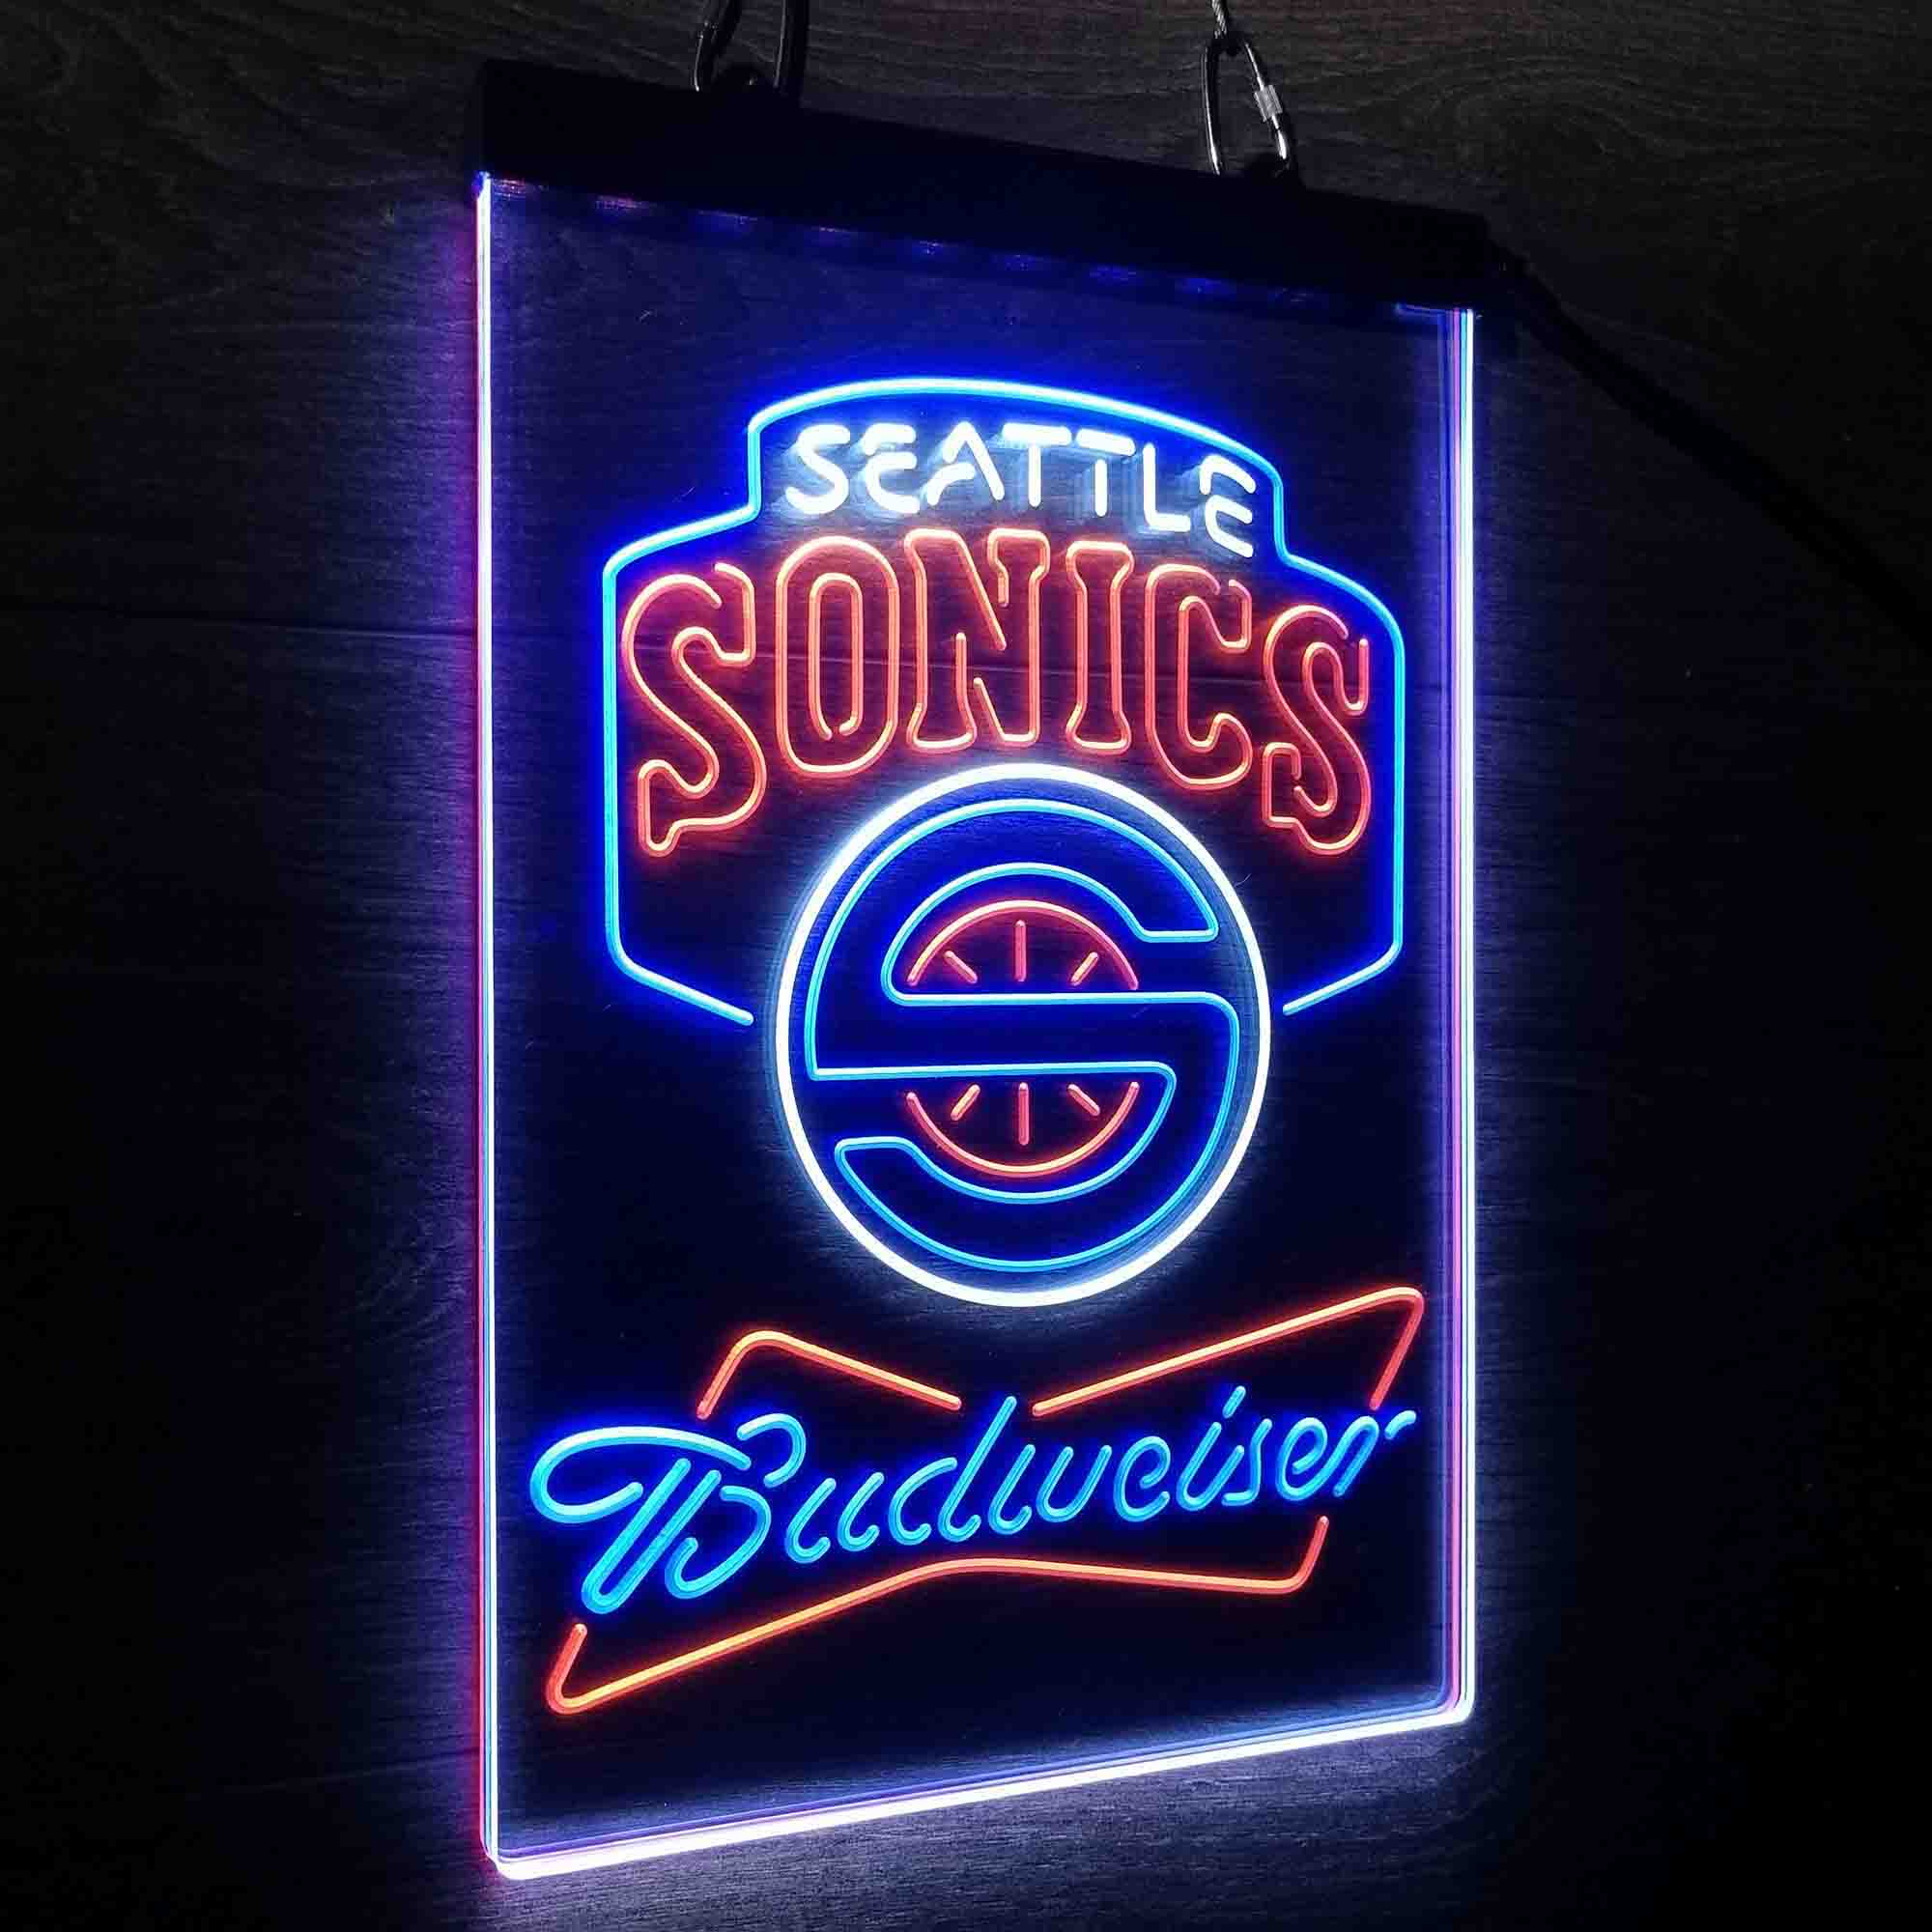 Seattle Supersonics Nba Budweiser Neon LED Sign 3 Colors